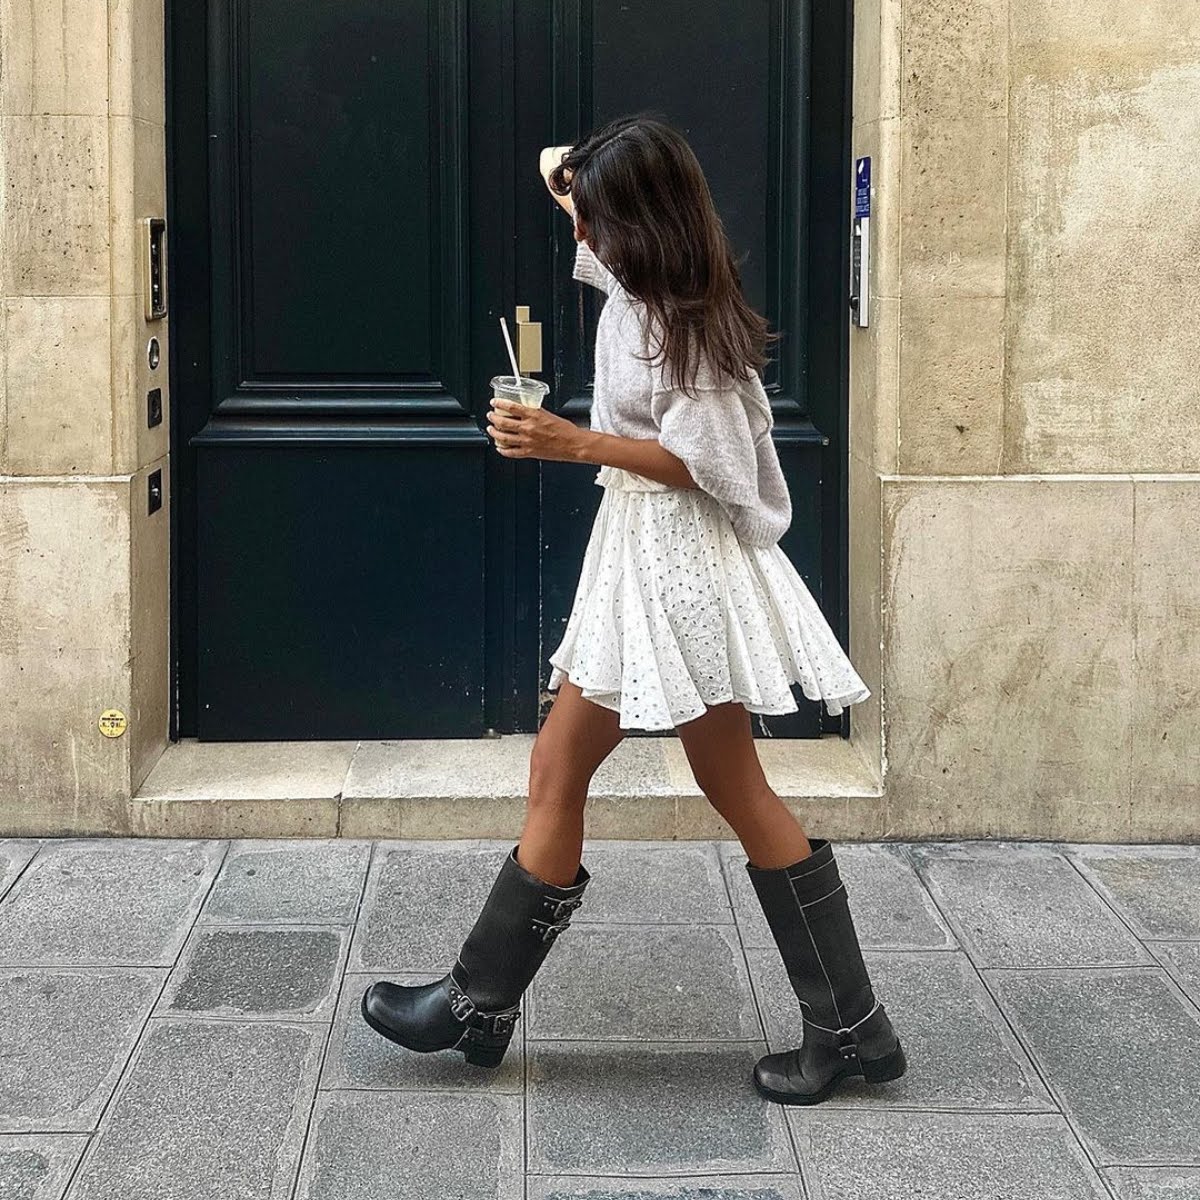 21 Stylish Ways to Slay in Knee High Boots - The Best Outfit Ideas